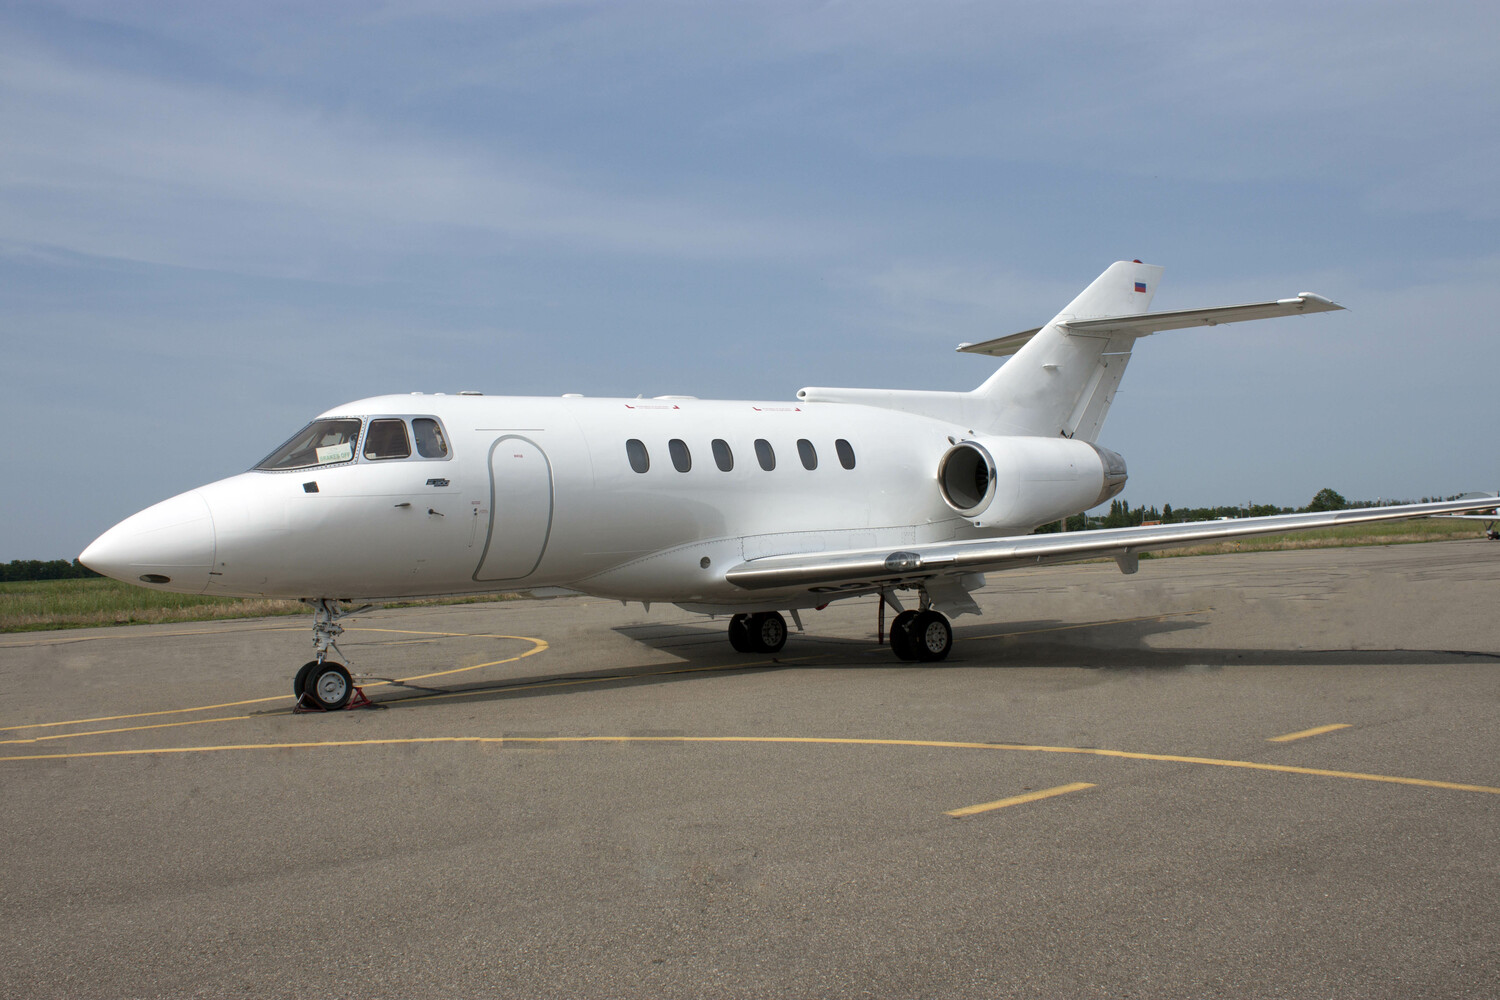 <span style="font-weight: bold;">Hawker-800Sp</span>